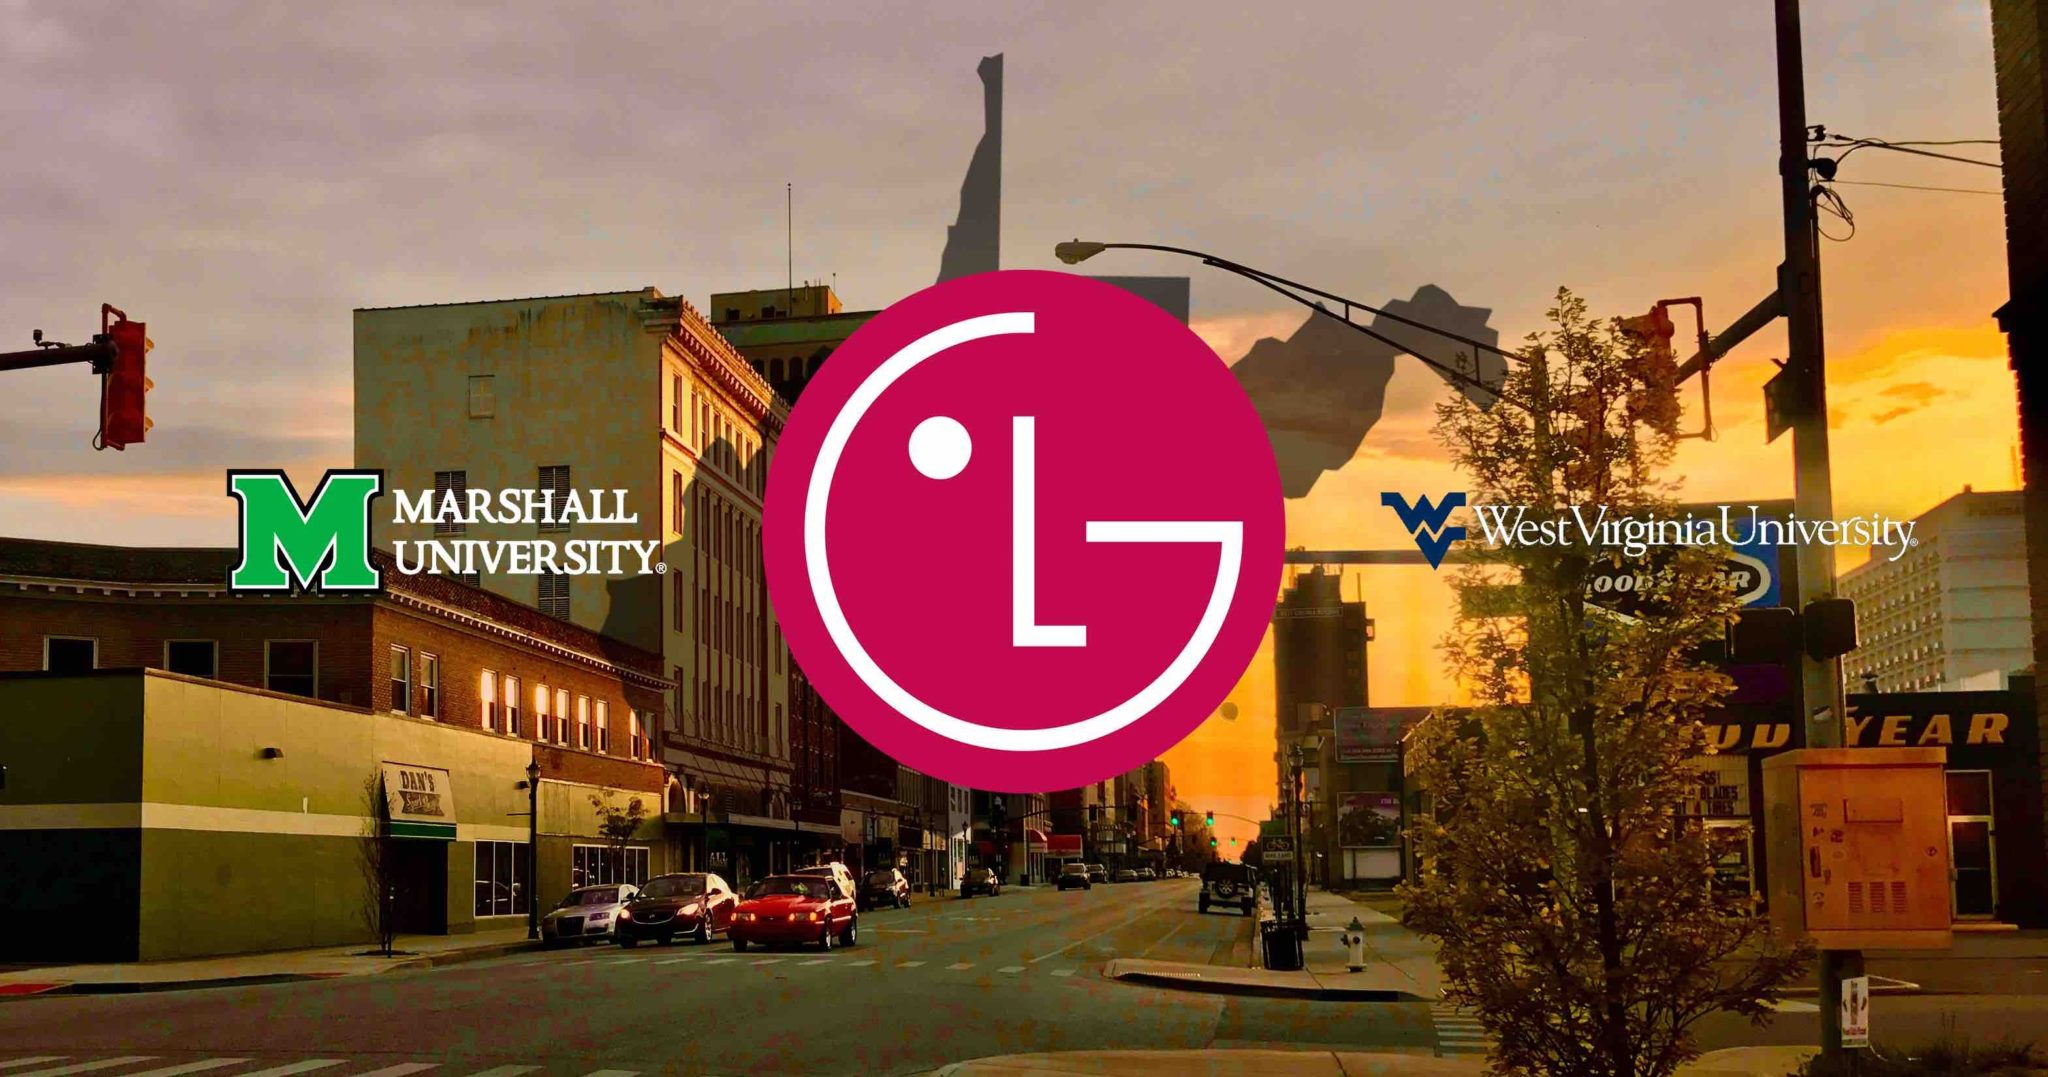 Life Is Old There, Life Is Good There: LG Electronics To Bring Innovation Centers To WV